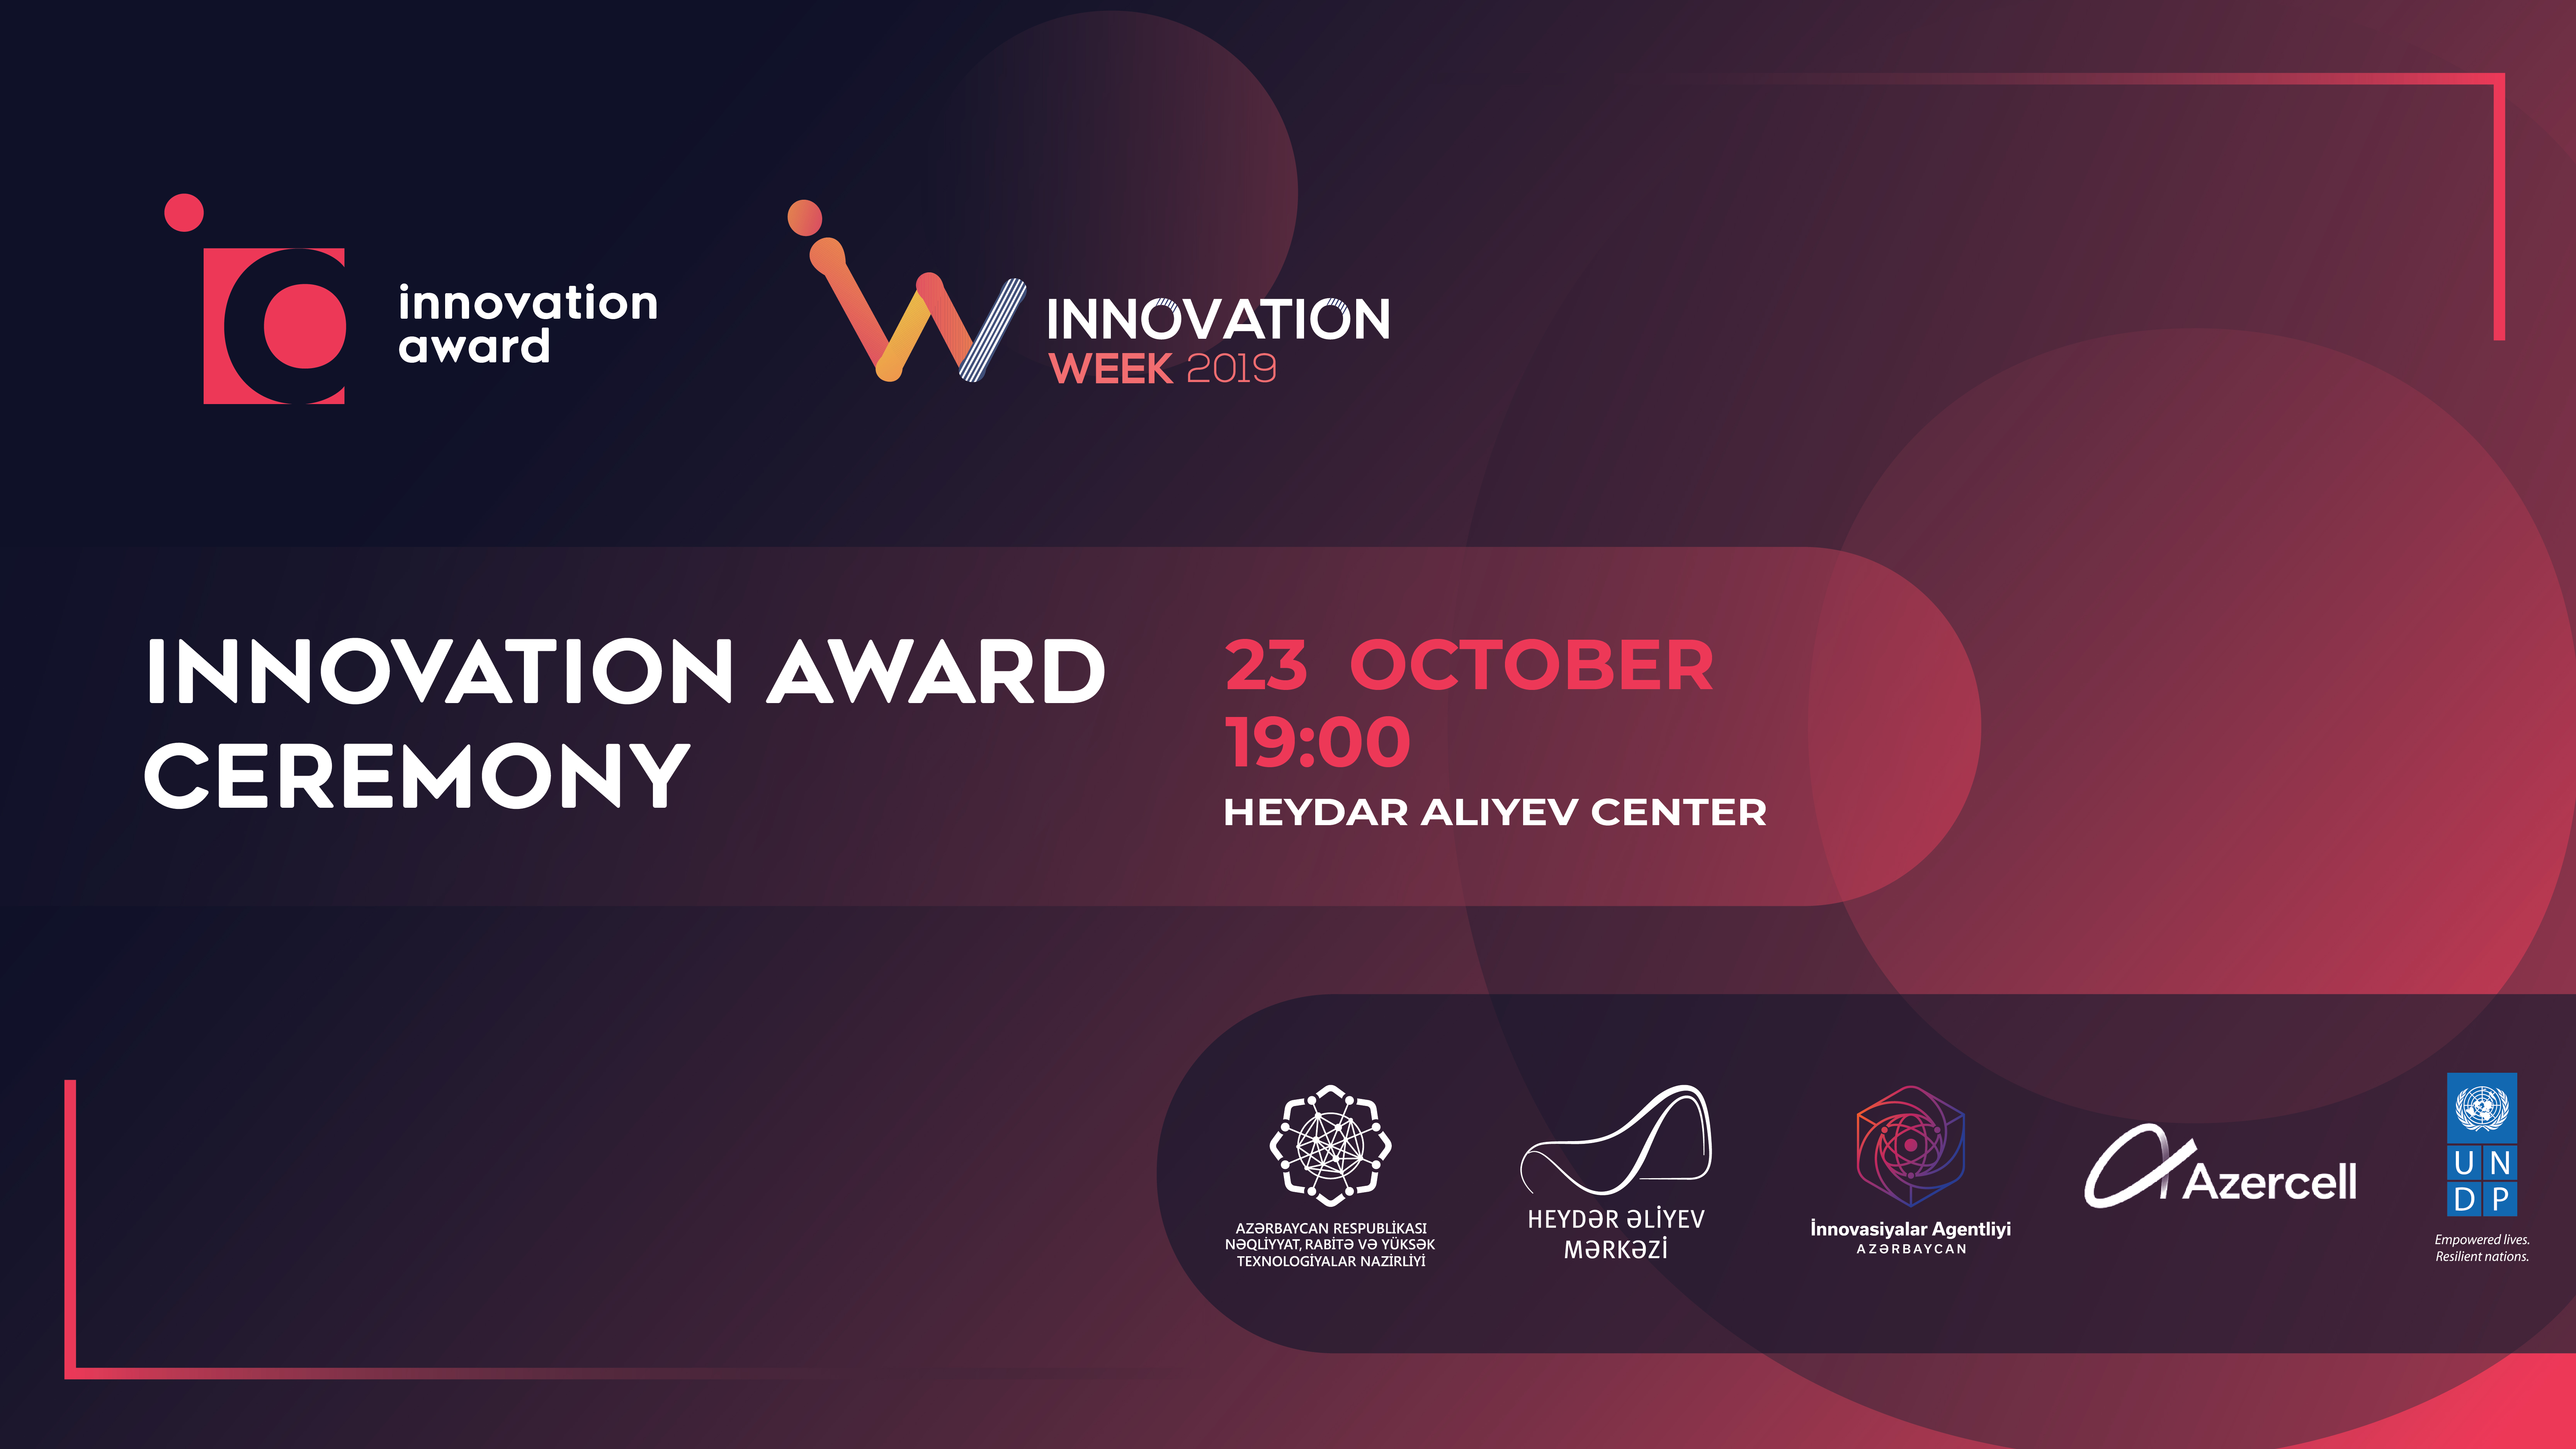 Accepting applications for participation in Azerbaijan Innovation Award contest launched